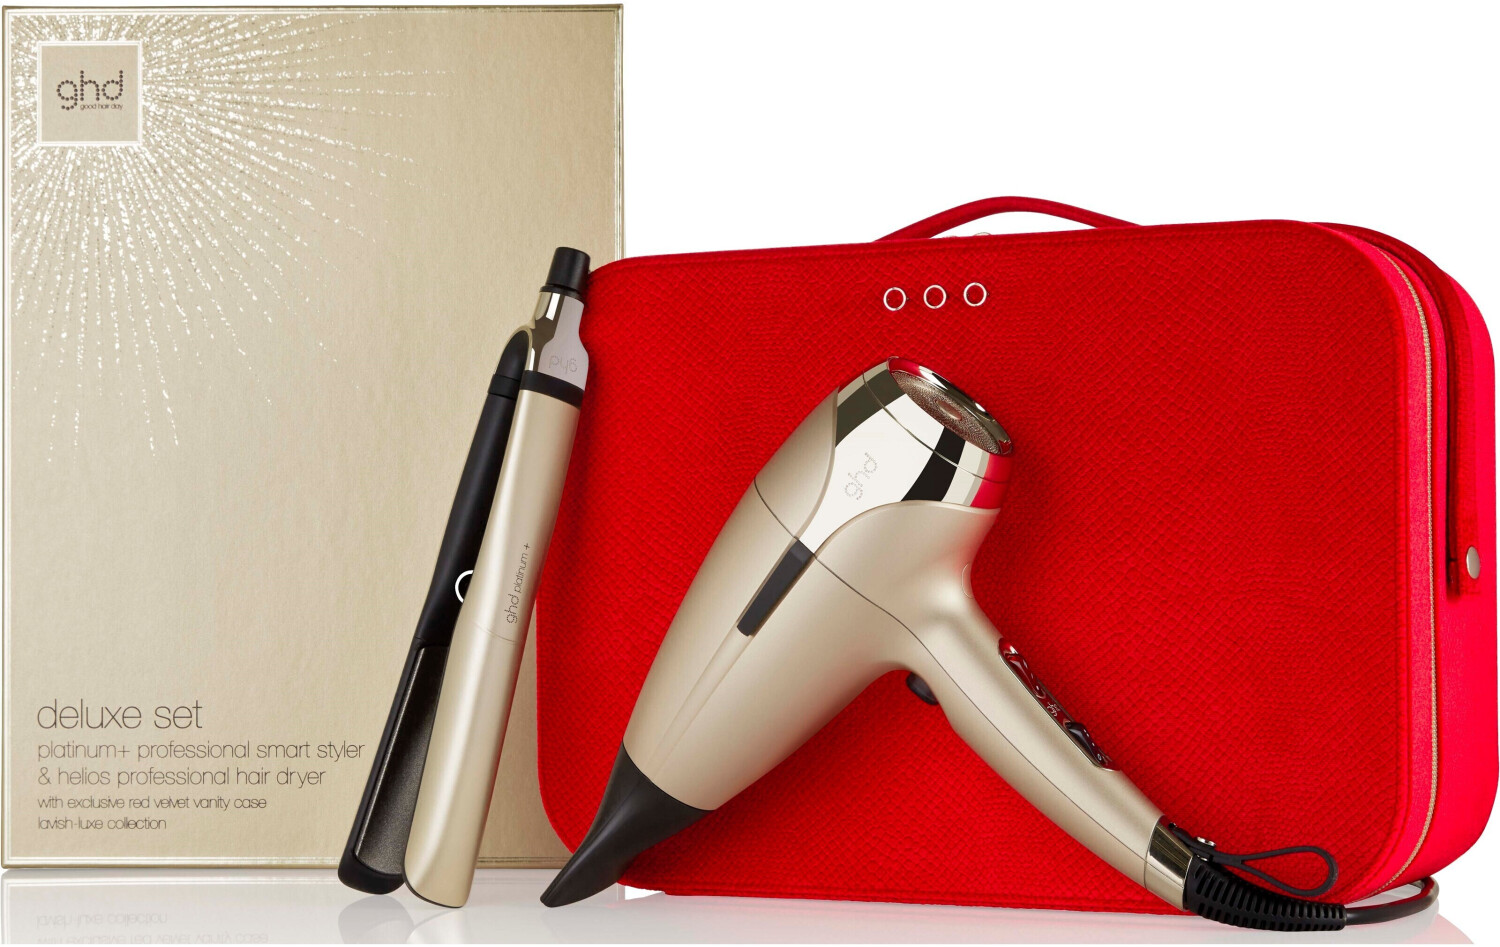 Seche-cheveux GHD Helios Edition Grand Luxe – Beauty-Privée